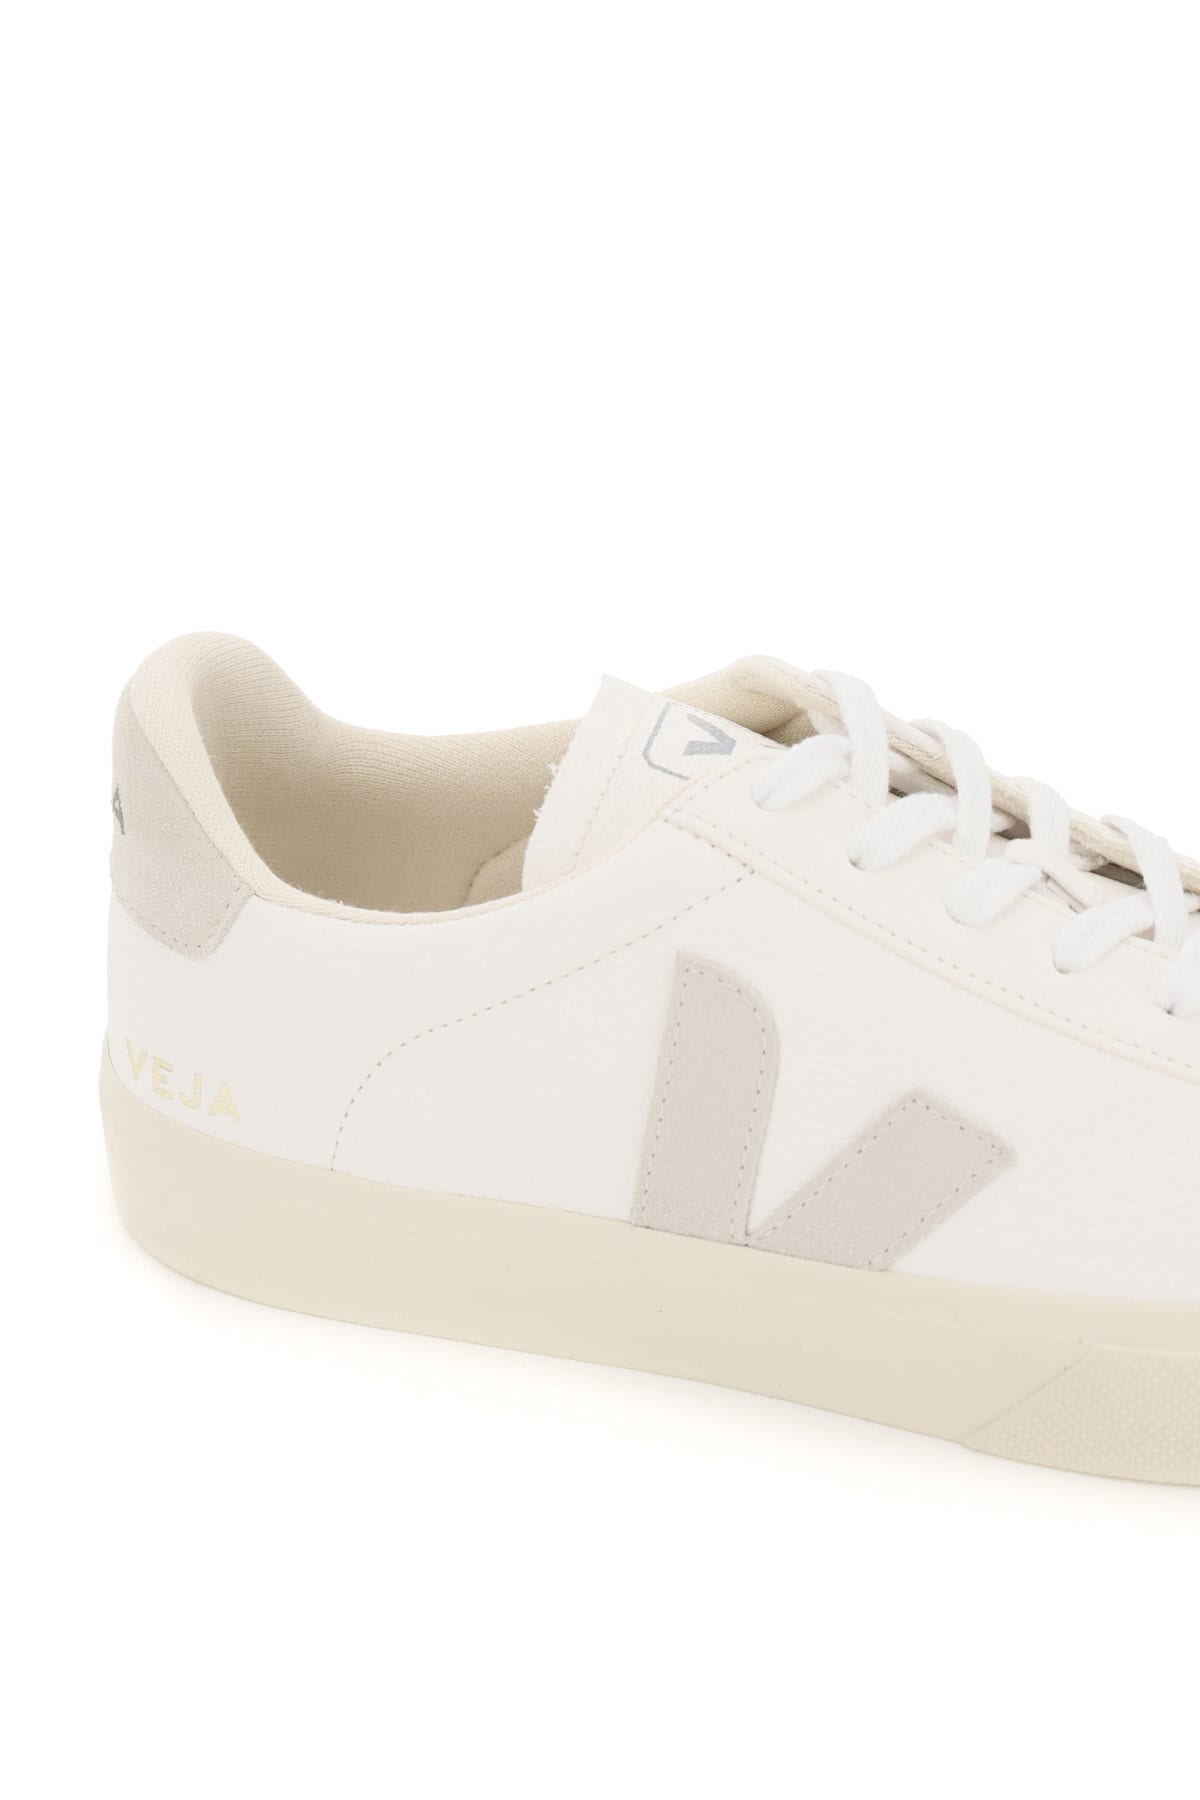 Shop Veja Campo Sneakers In Extra White Natural Suede (white)